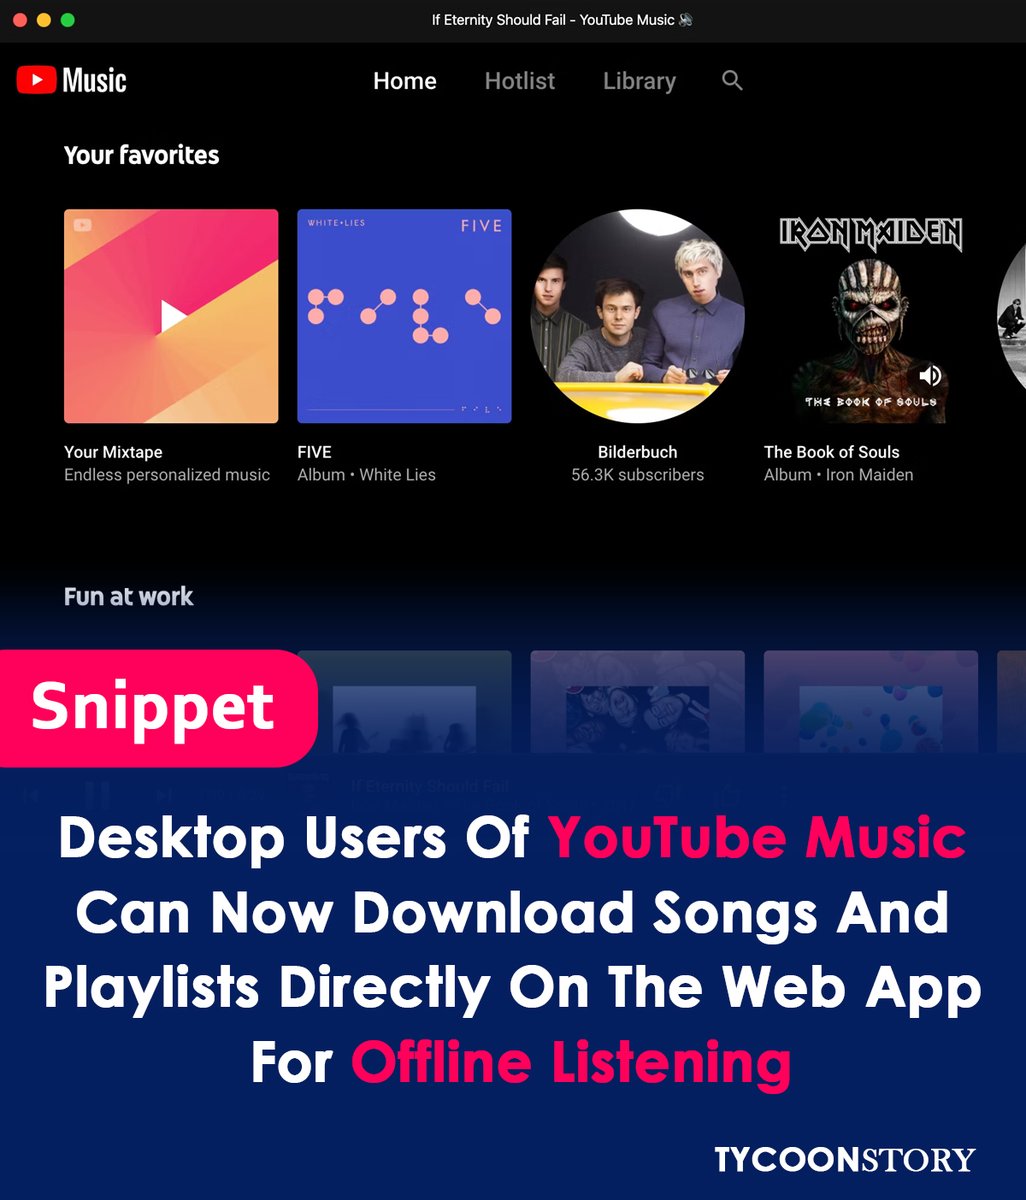 YouTube Music lets you download songs and playlists on desktop now for offline listening!
#youtubemusic #desktopapps #OfflineListening #newfeatures #musicdownload #streaming #MusicEverywhere #offlineplaylists #musicupdates #technews #streamingwars @YouTube @youtubemusic